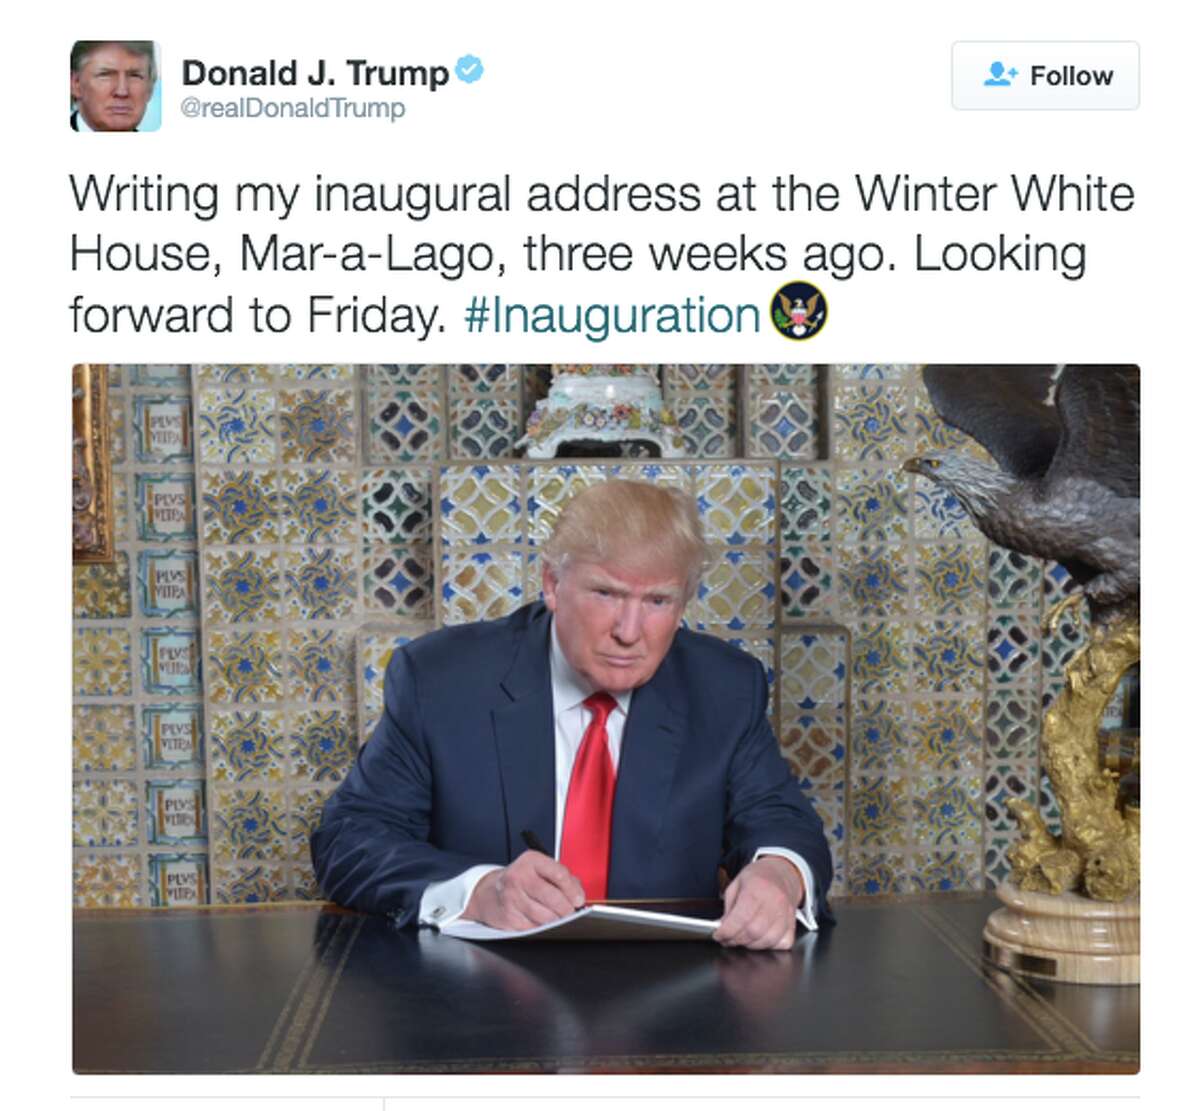 Trump tweeted this photo of himself earlier today, and Twitter trolls were quick to mock the president-elect with a series of memes. 